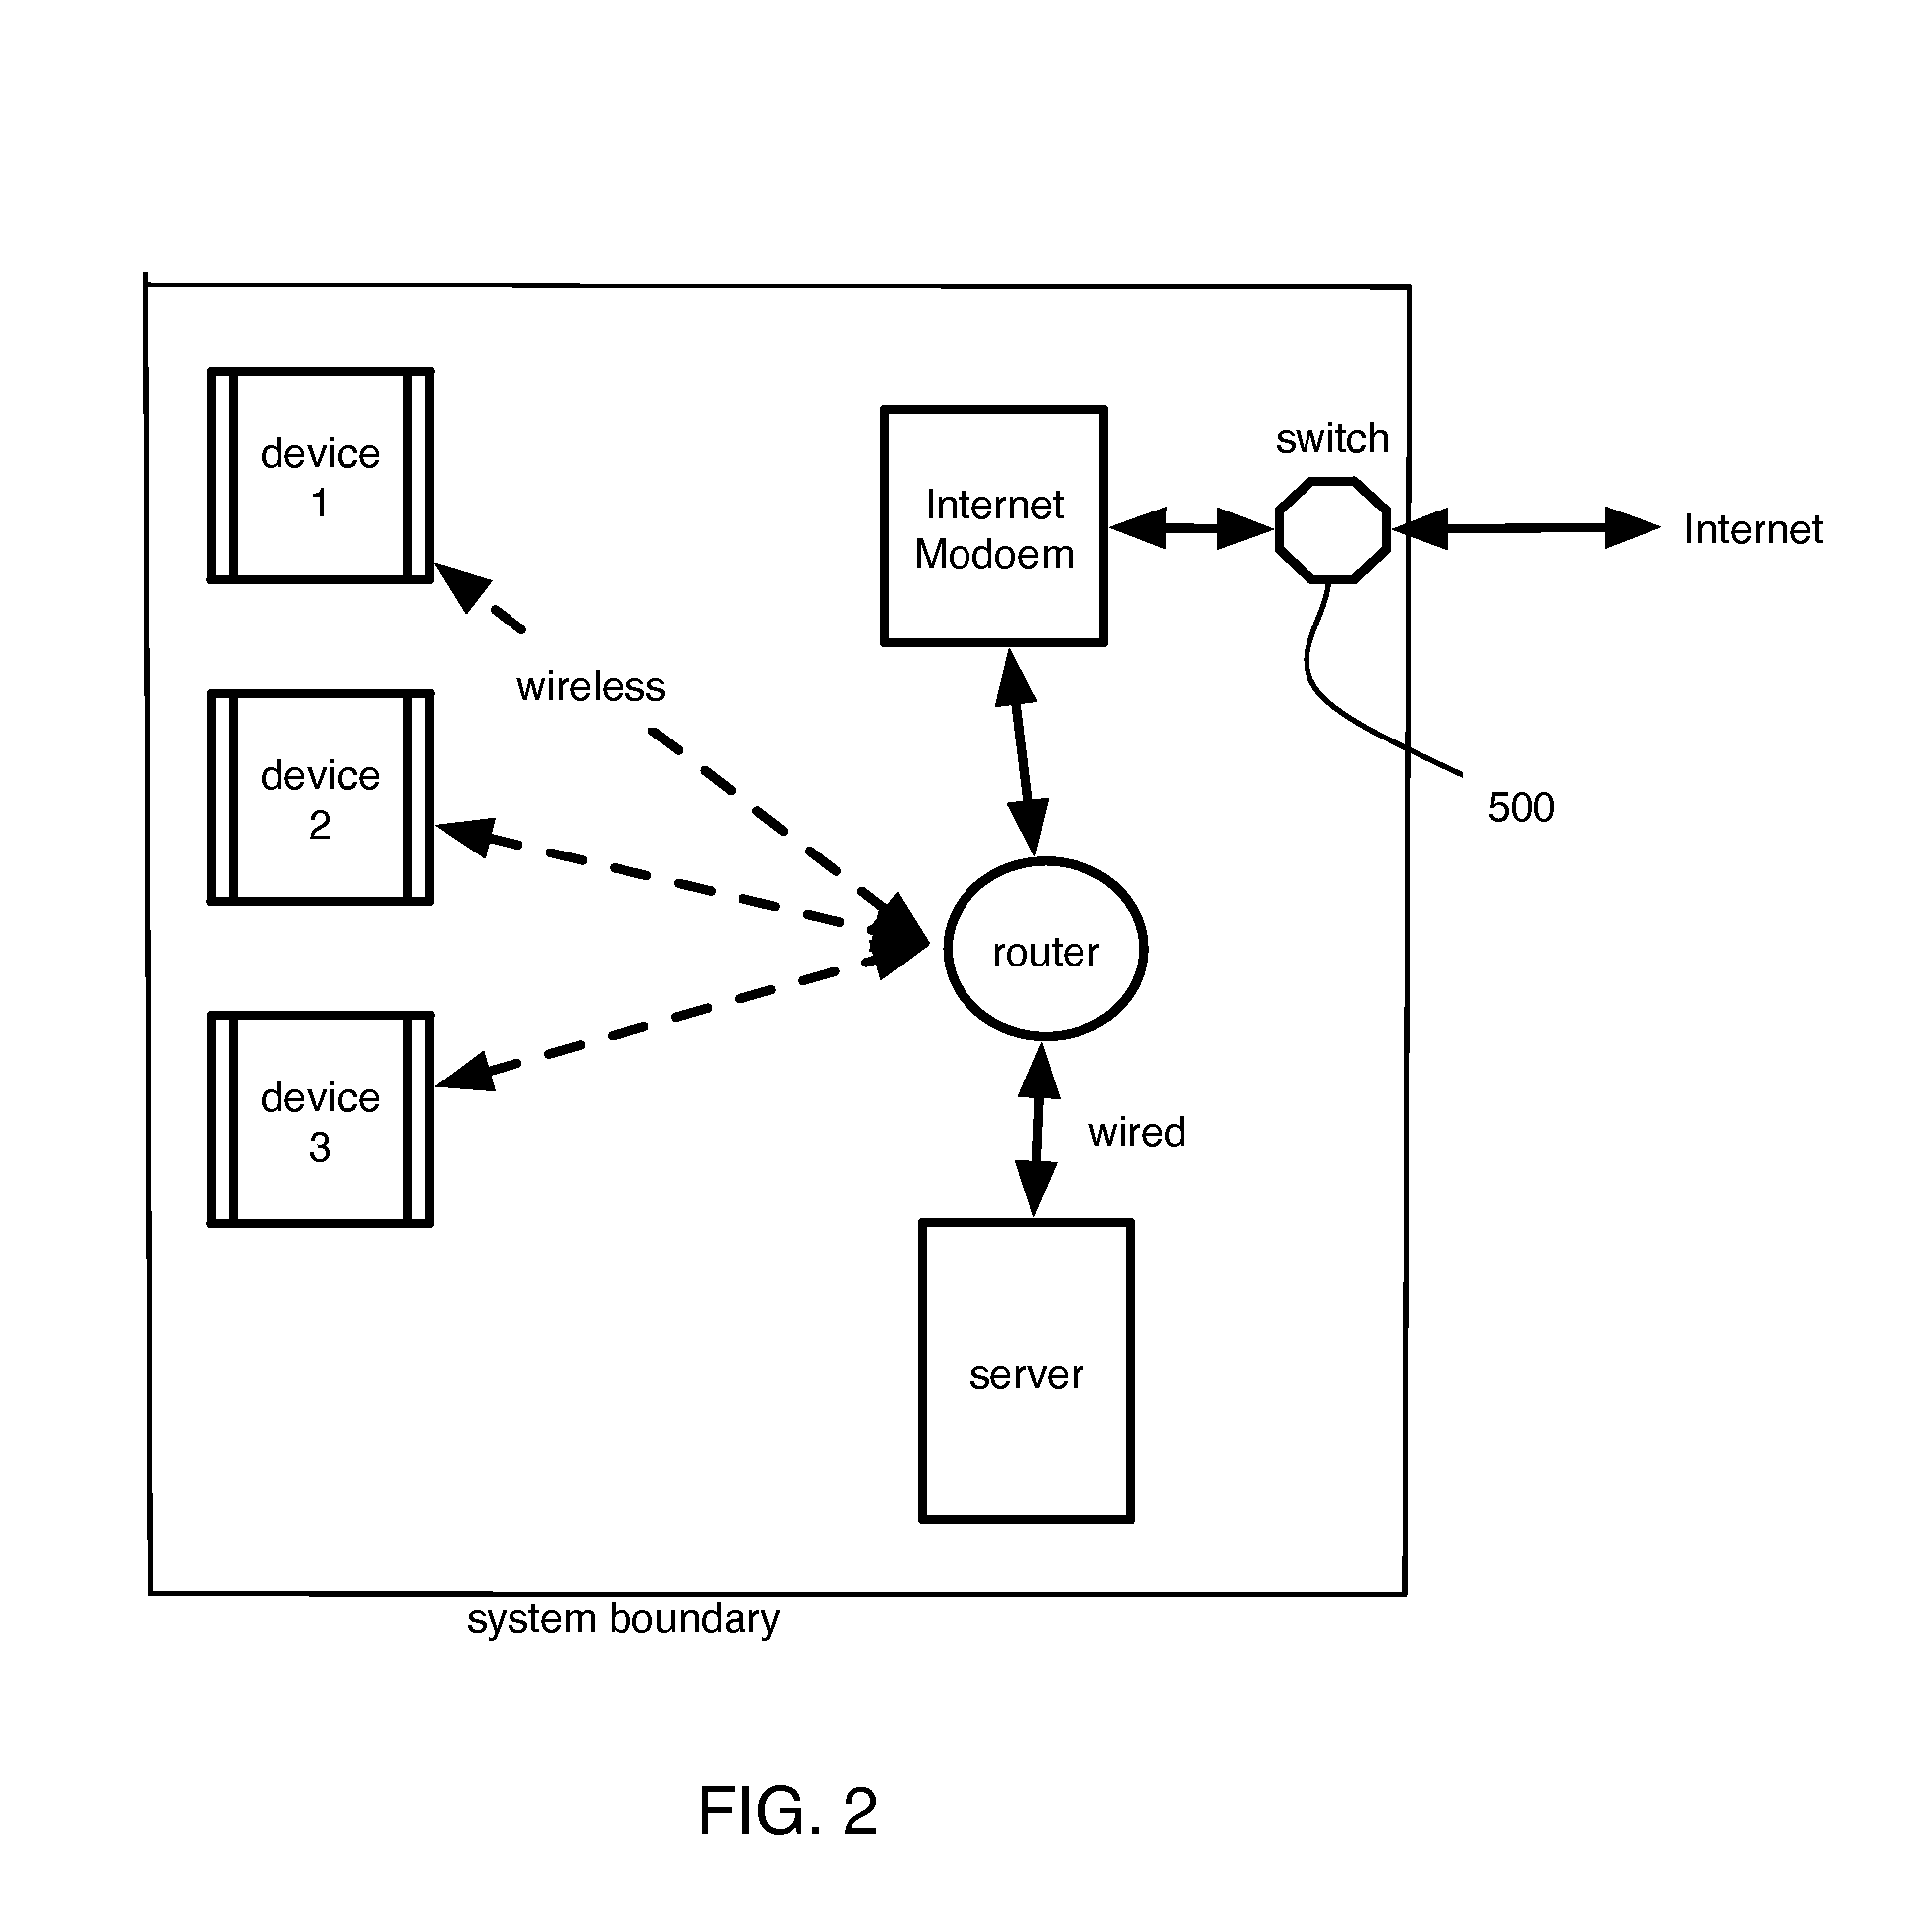 Cellular-call activated, mechanical interrupt device for a wired connection to the Internet